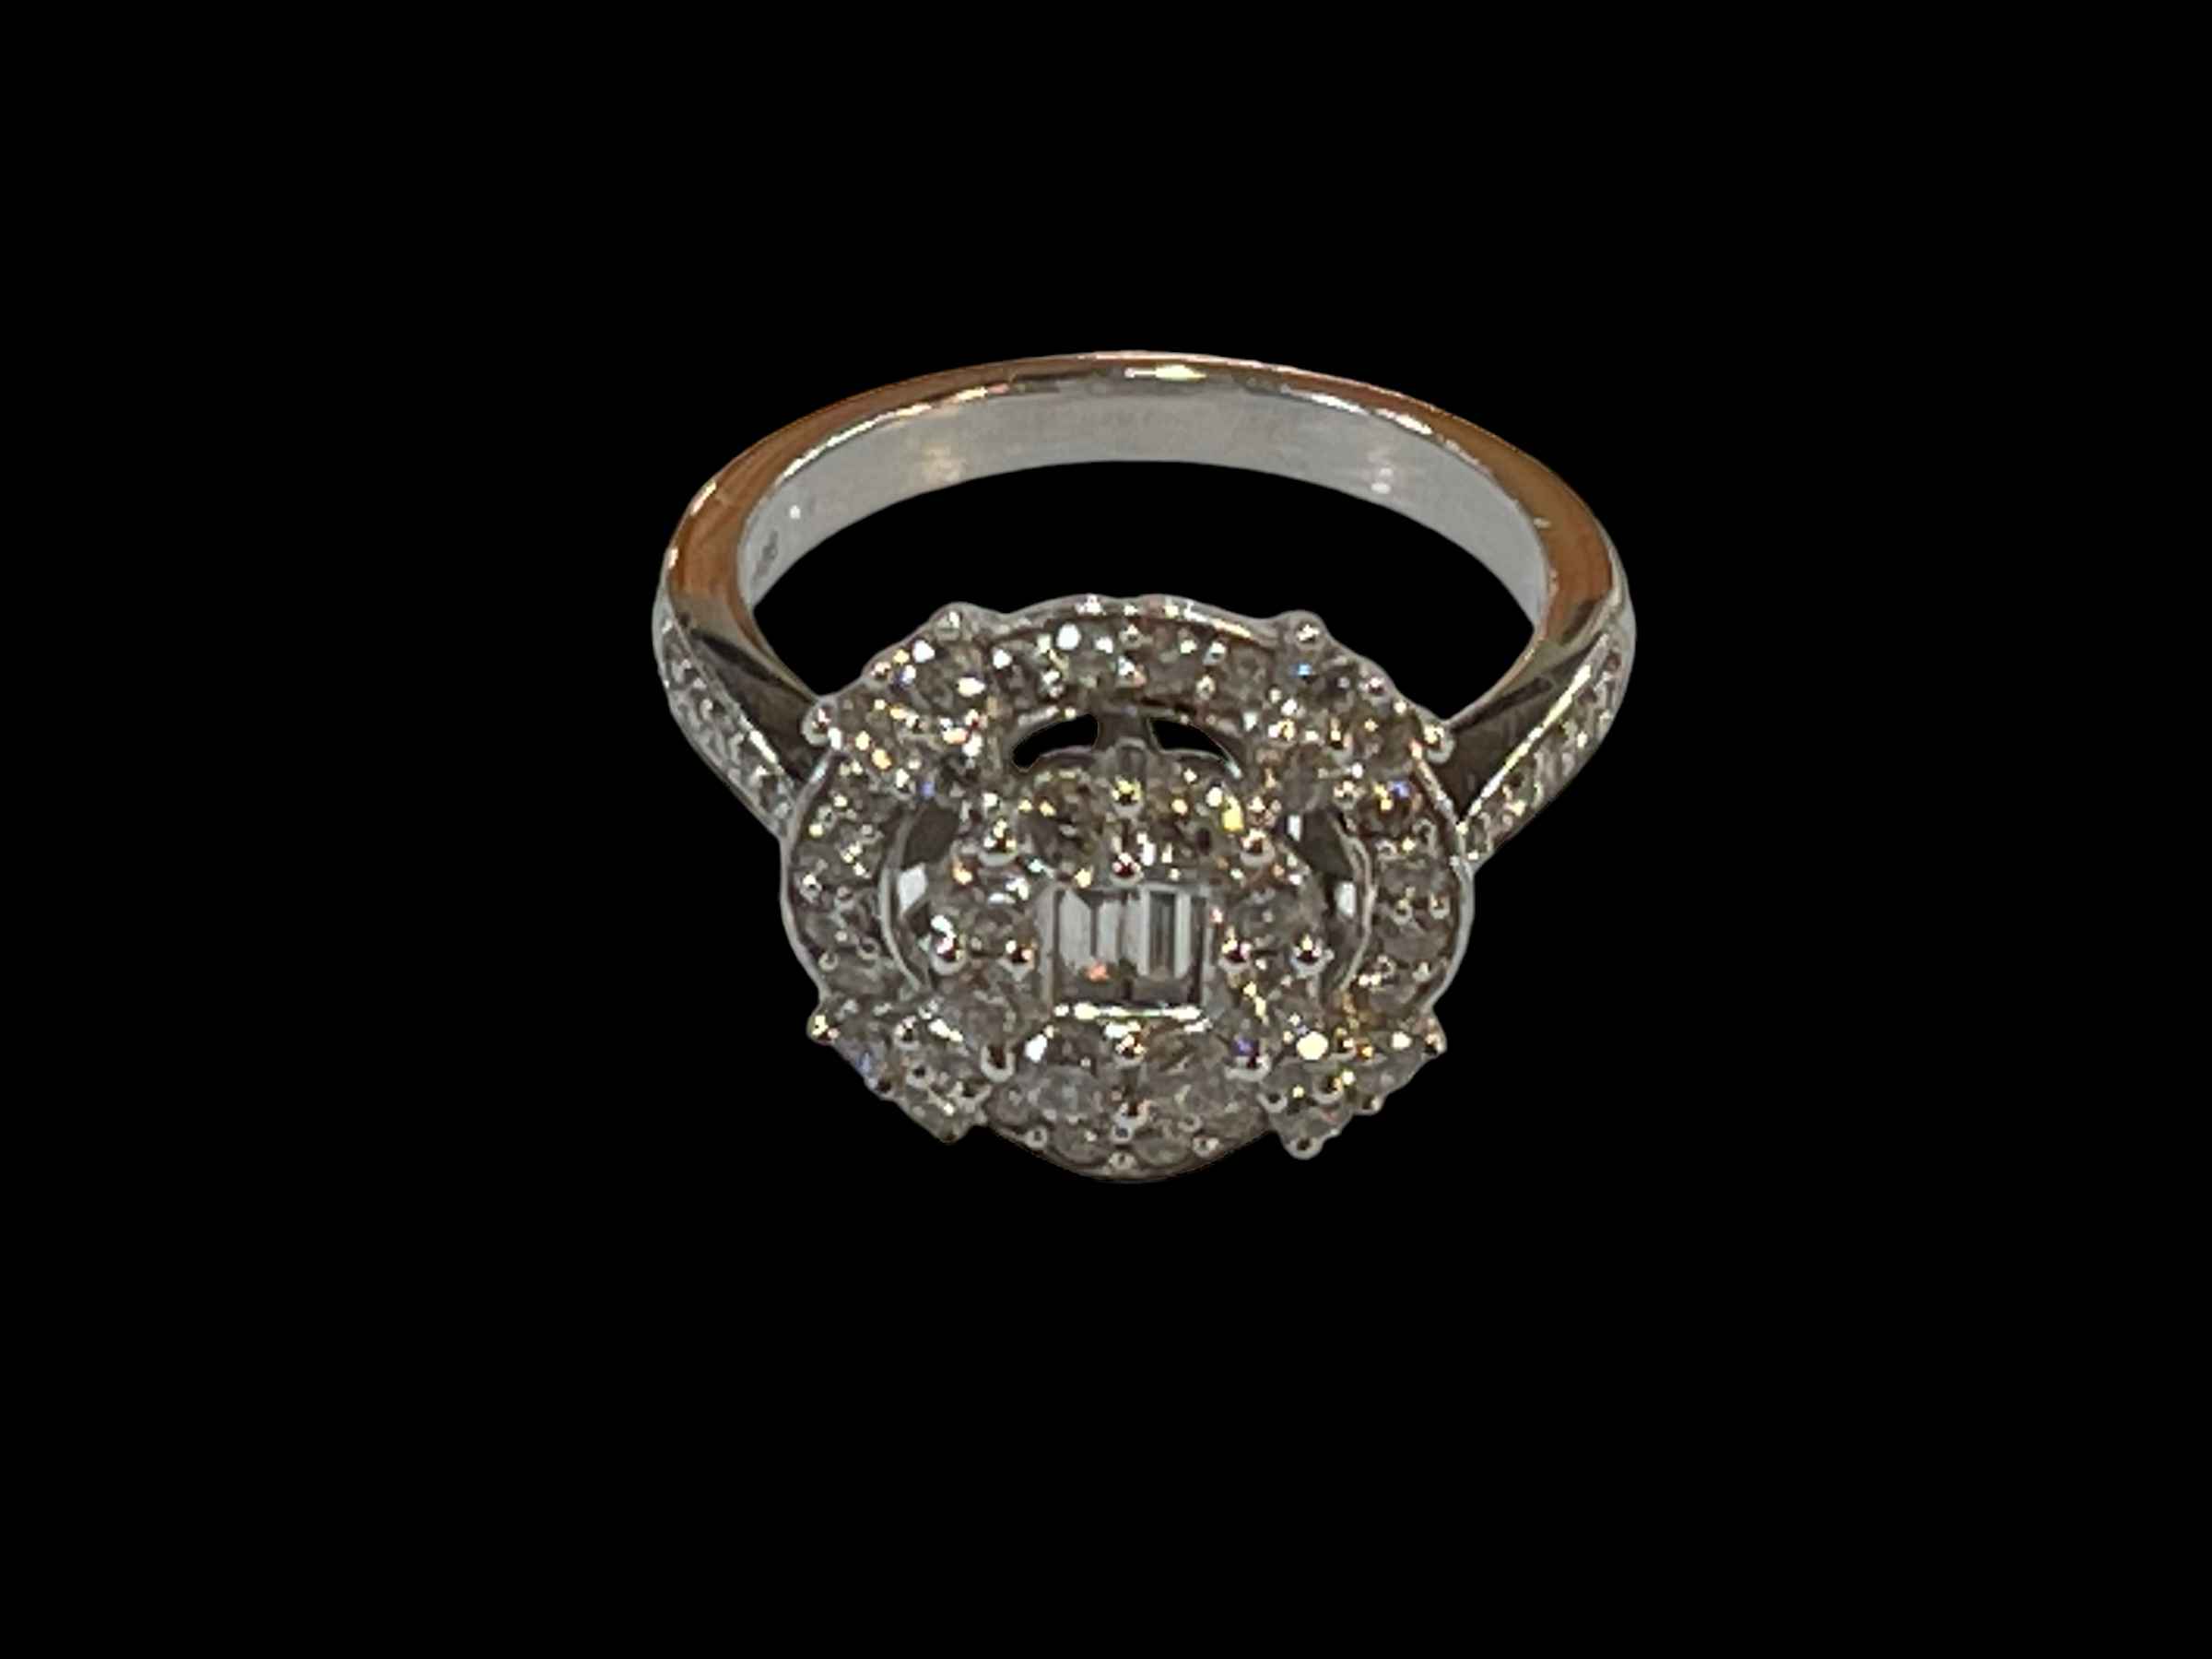 Fancy set diamond cluster ring having two central baguette diamonds surrounded by two rows of